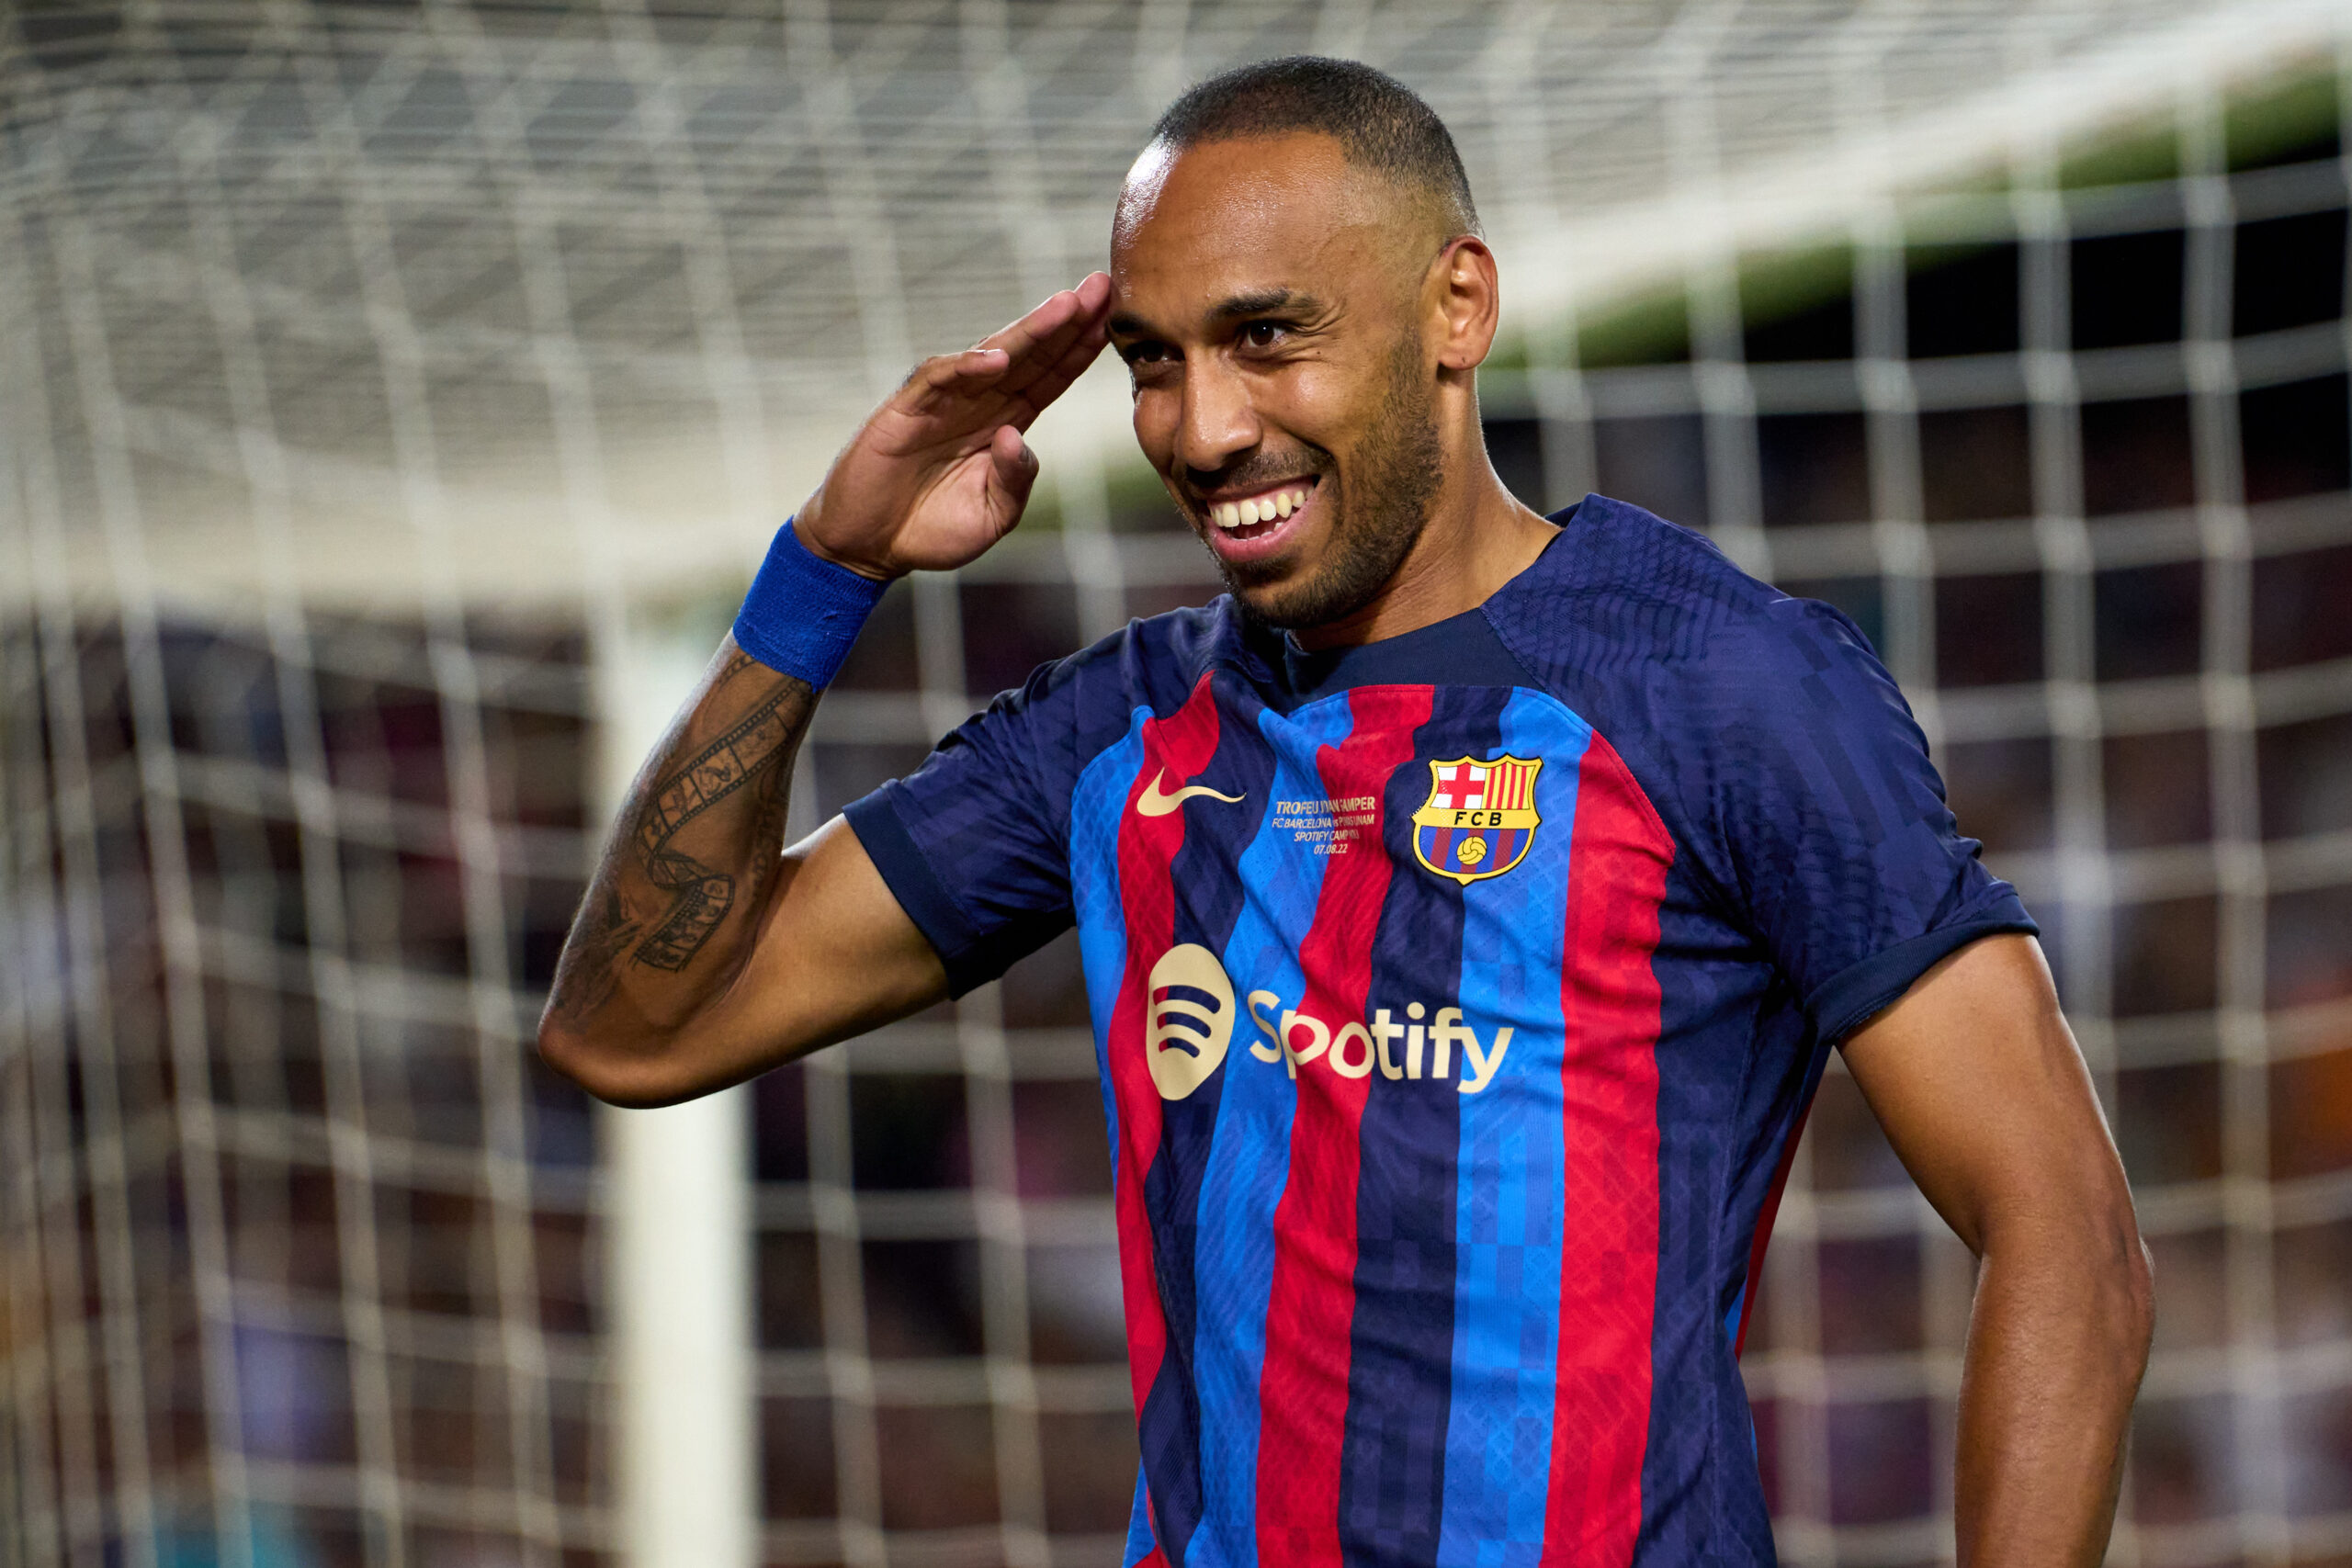 BARCELONA, SPAIN - AUGUST 07: Pierre-Emerick Aubameyang of FC Barcelona celebrates after scoring his team's fifth goal during the Joan Gamper Trophy match between FC Barcelona and Pumas UNAM at Spotify Camp Nou on August 07, 2022 in Barcelona, Spain.